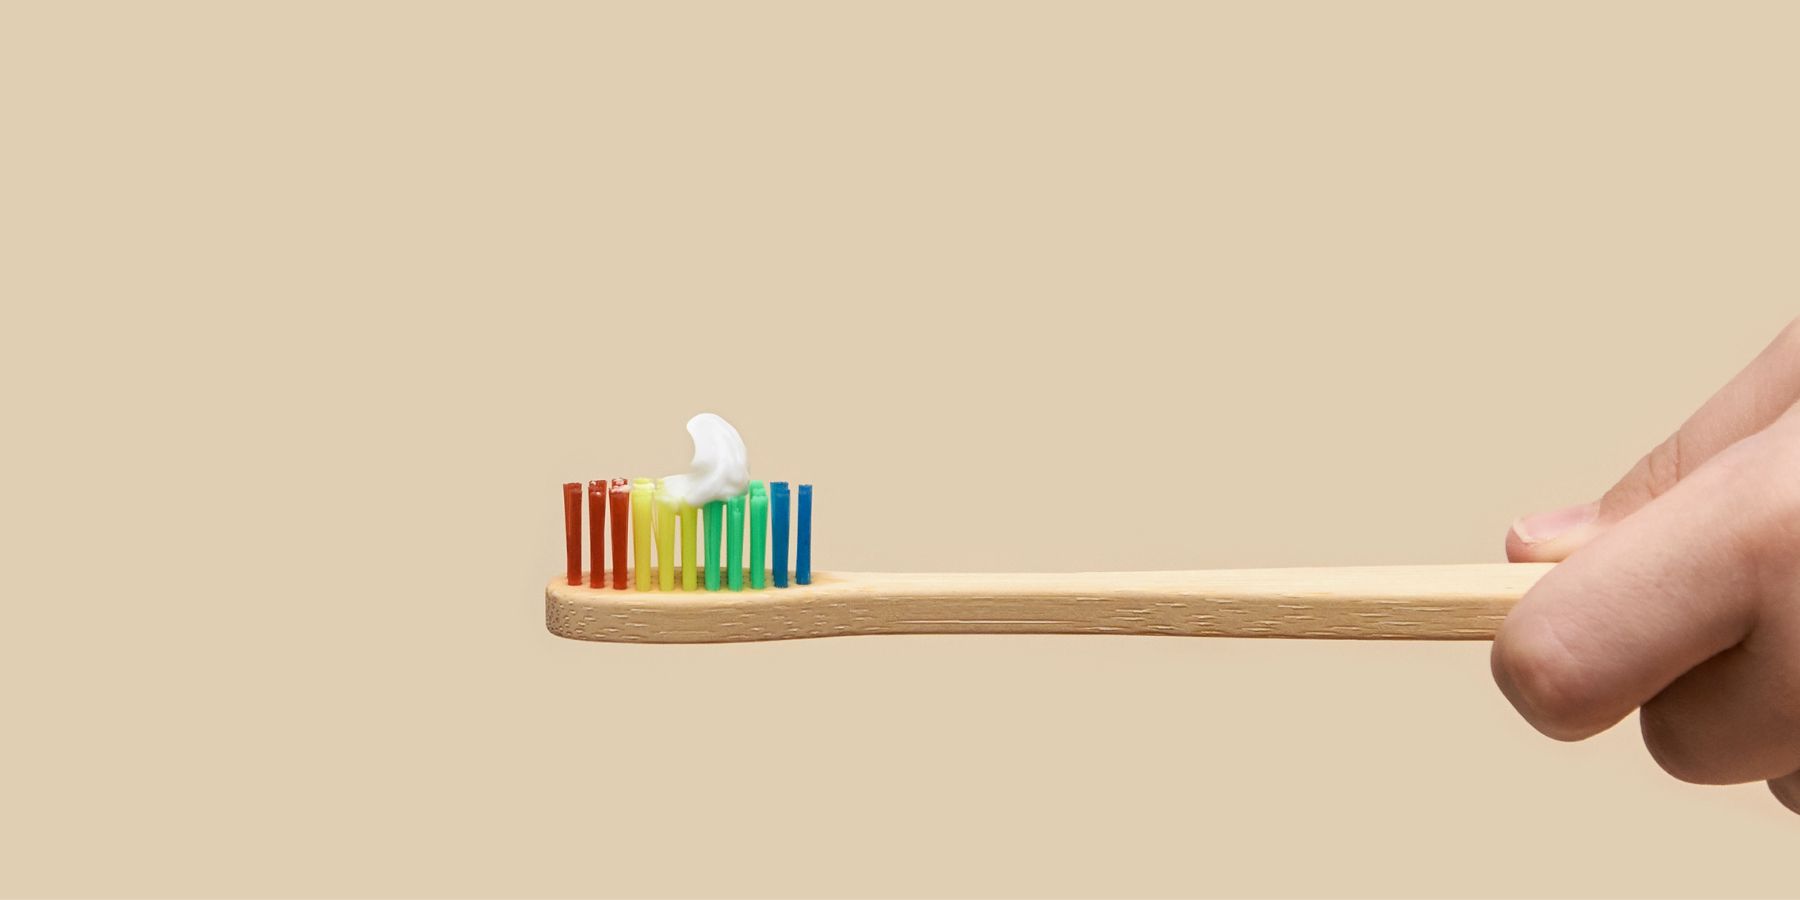 History of the Toothpaste and Toothbrush